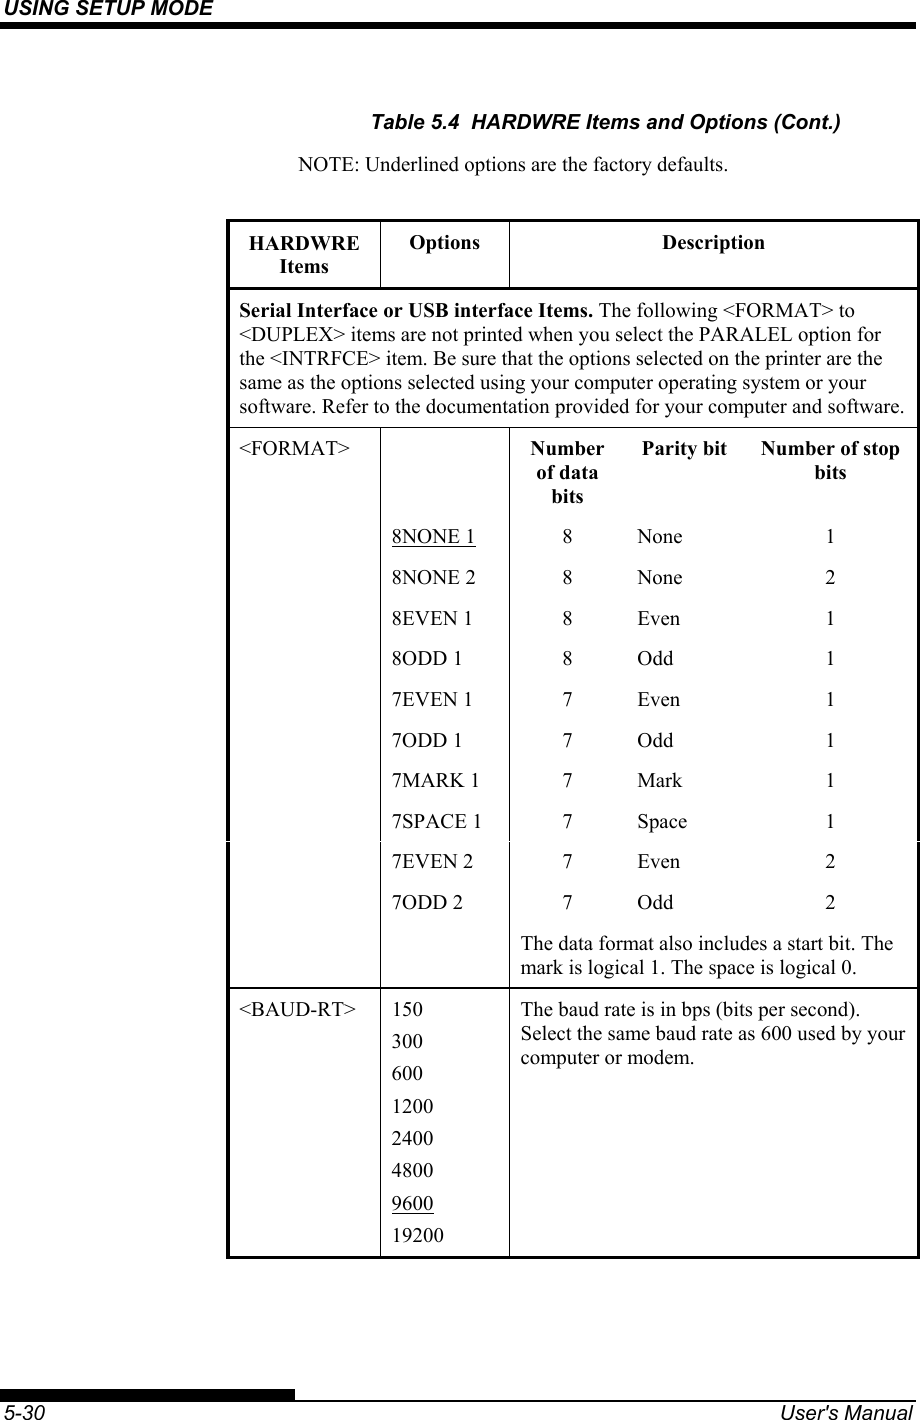 USING SETUP MODE    5-30  User&apos;s Manual Table 5.4  HARDWRE Items and Options (Cont.) NOTE: Underlined options are the factory defaults.  HARDWRE Items Options Description Serial Interface or USB interface Items. The following &lt;FORMAT&gt; to &lt;DUPLEX&gt; items are not printed when you select the PARALEL option for the &lt;INTRFCE&gt; item. Be sure that the options selected on the printer are the same as the options selected using your computer operating system or your software. Refer to the documentation provided for your computer and software. &lt;FORMAT&gt;   Number of data bits Parity bit  Number of stop bits  8NONE 1 8 None  1  8NONE 2 8 None 2  8EVEN 1 8 Even 1  8ODD 1 8 Odd 1  7EVEN 1 7 Even 1  7ODD 1 7 Odd 1  7MARK 1 7 Mark 1  7SPACE 1 7 Space 1  7EVEN 2 7 Even 2  7ODD 2 7 Odd 2   The data format also includes a start bit. The mark is logical 1. The space is logical 0. &lt;BAUD-RT&gt; 150 300 600 1200 2400 4800 9600 19200 The baud rate is in bps (bits per second). Select the same baud rate as 600 used by your computer or modem.  